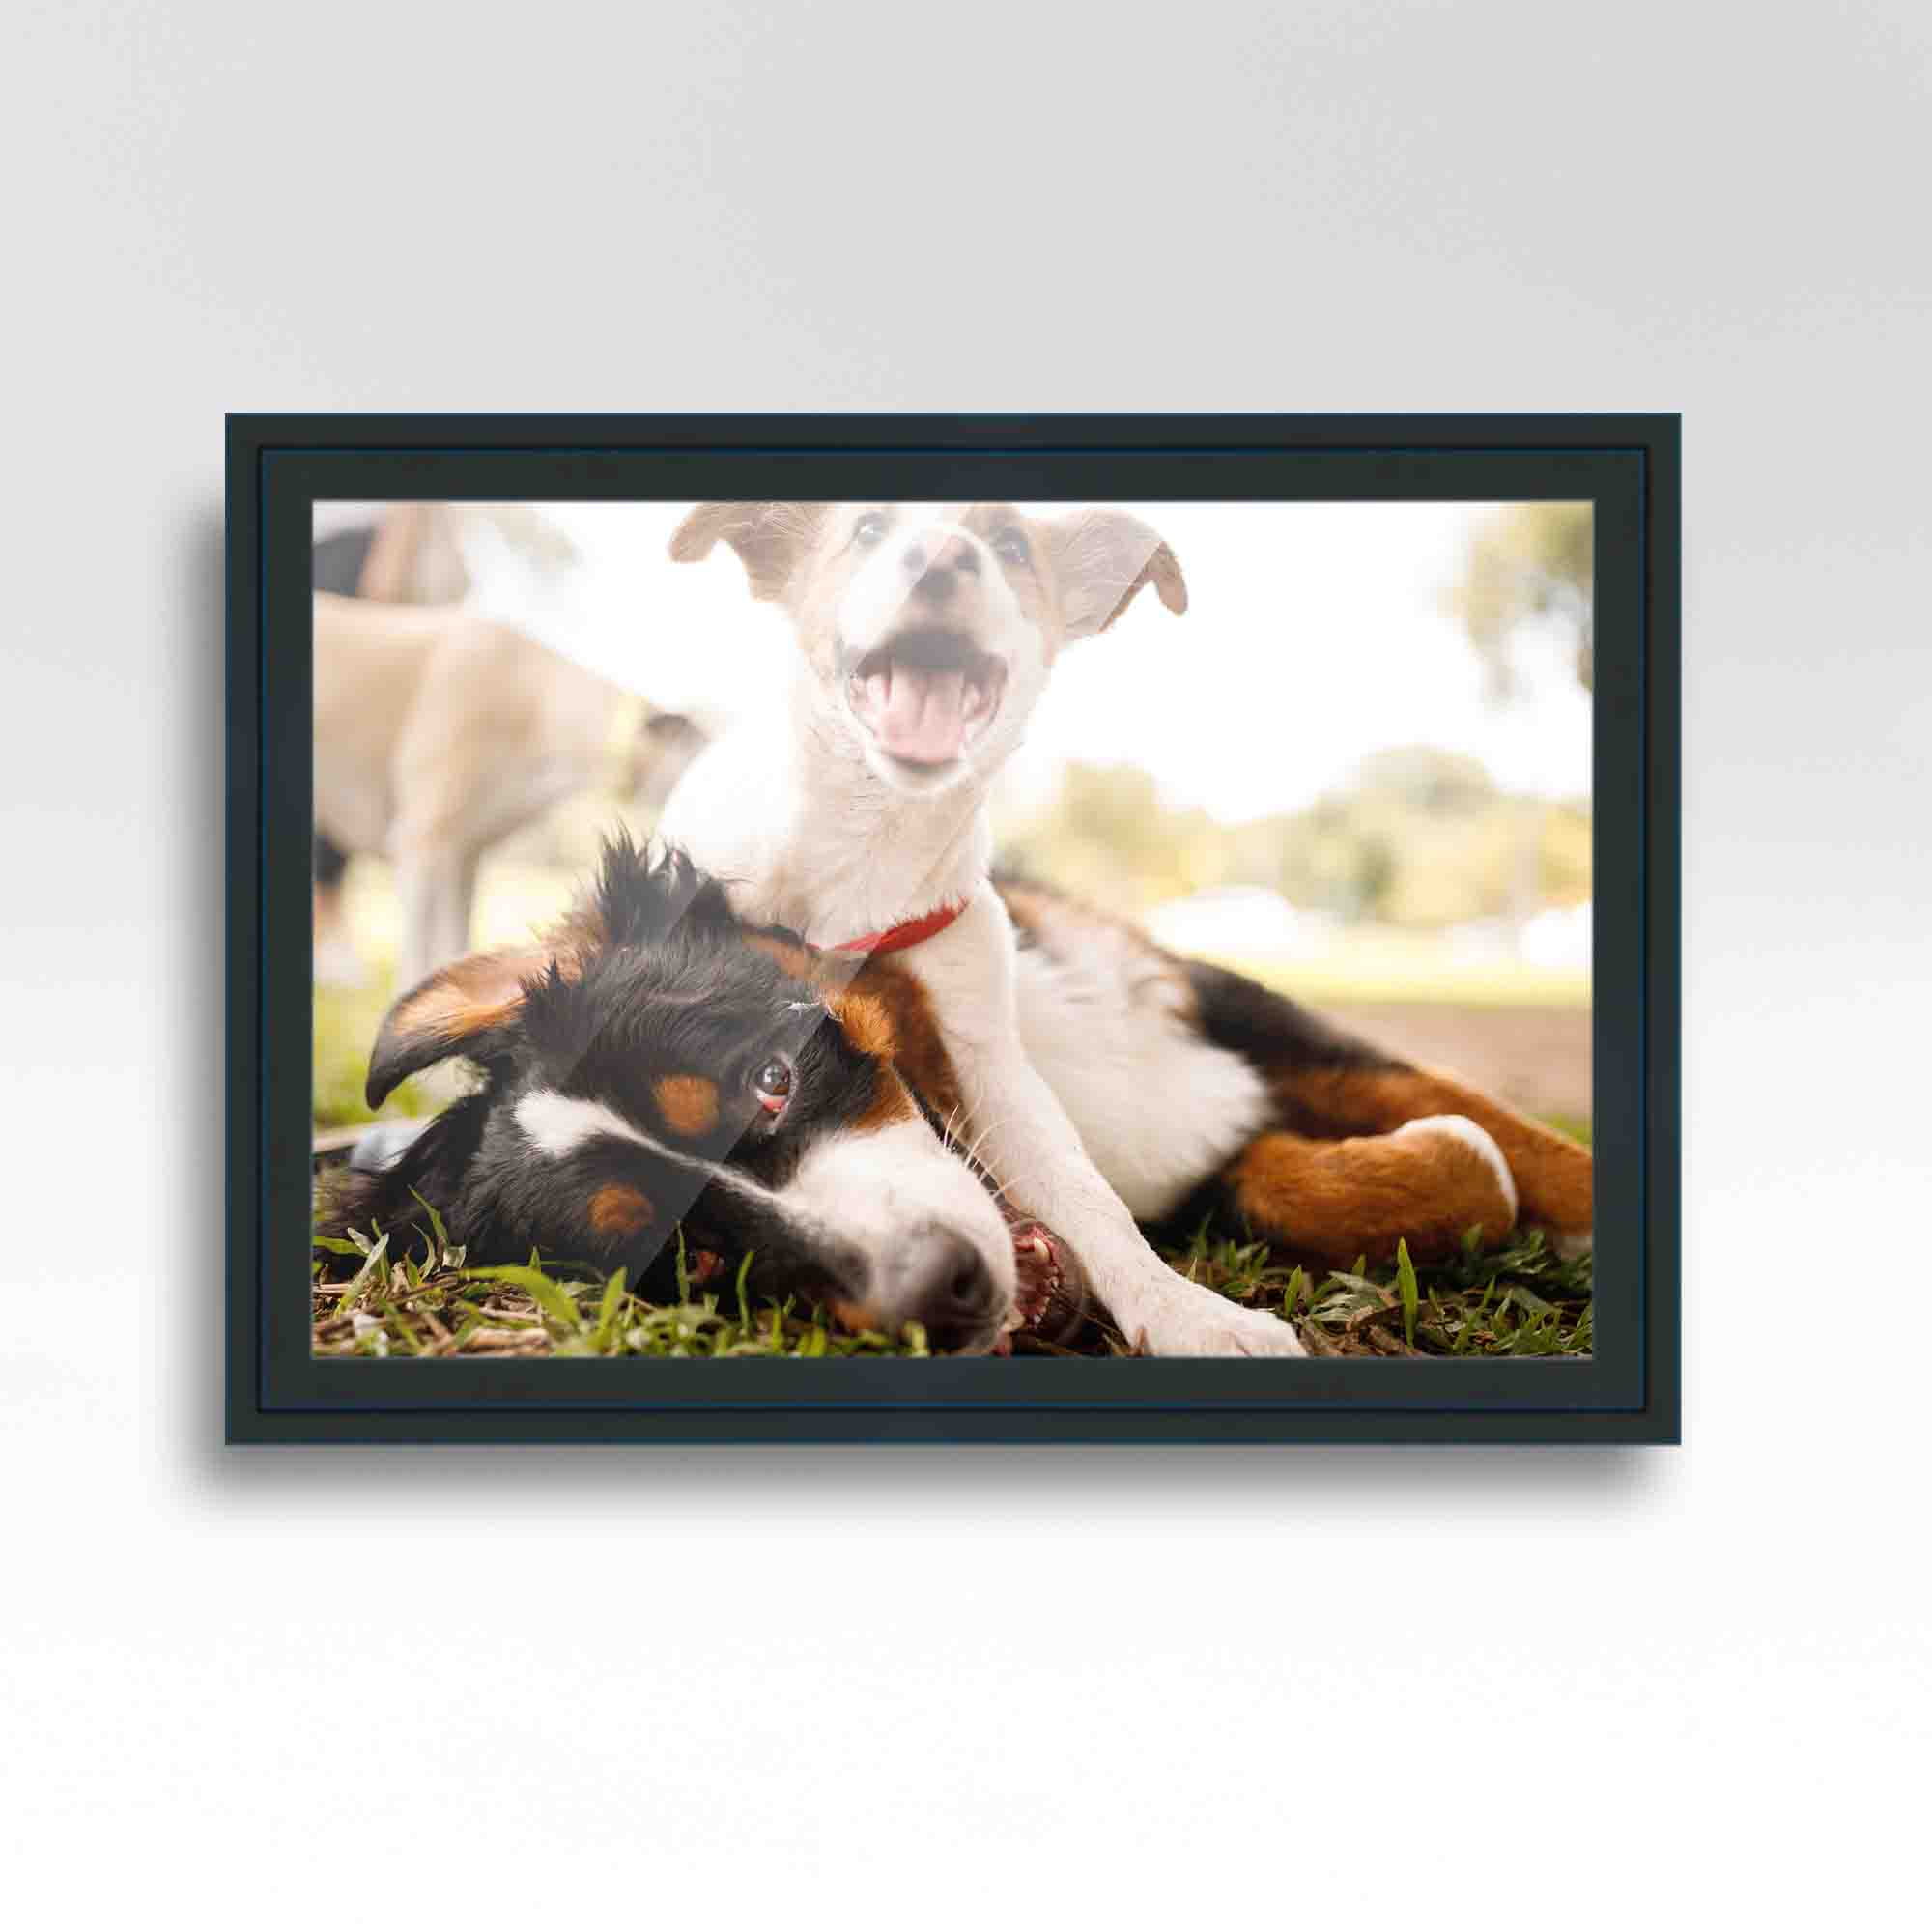 6x10 Frame Black Real Wood Picture Frame Width 1.25 inches | Interior Frame  Depth 0.5 inches 